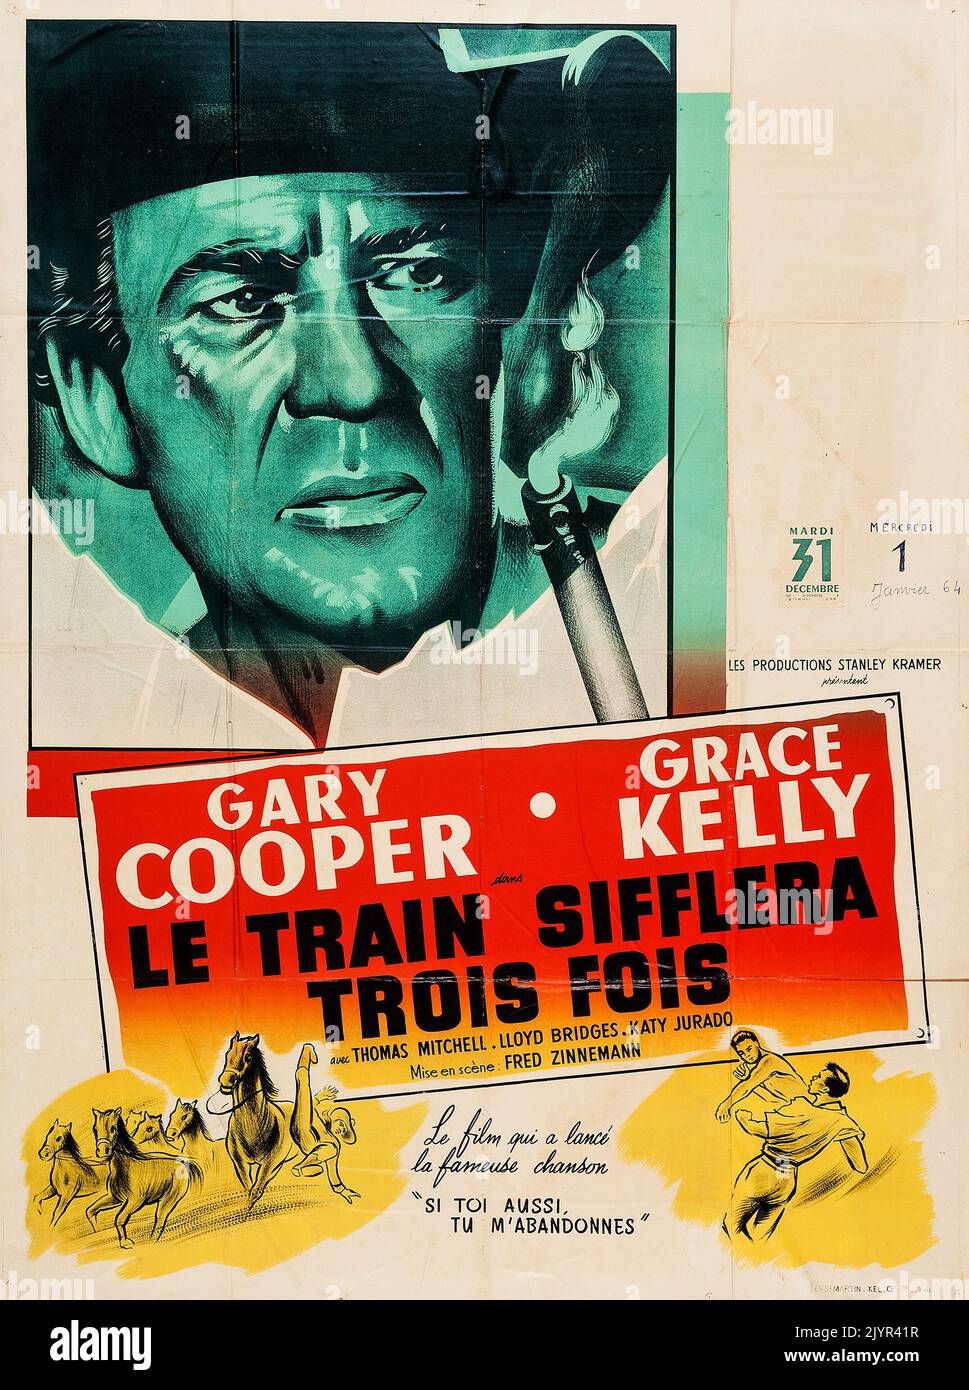 High Noon 1952  (United Artists, R-1960). French Grande film poster feat Gary Cooper - Western movie Stock Photo